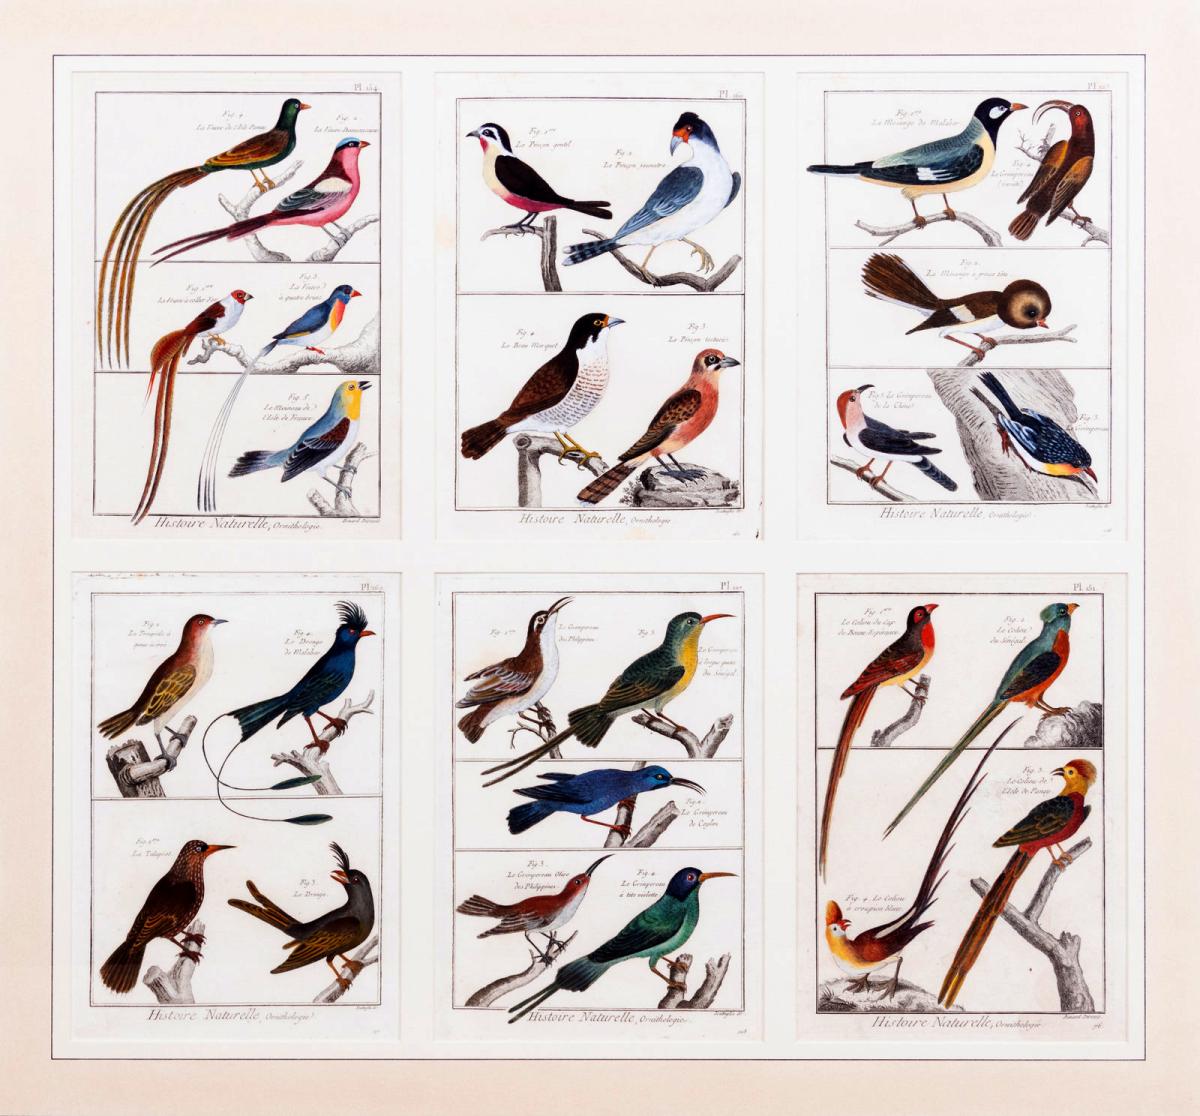 Large Picture containing Six Different Engravings of Grouping of Birds, Histoire Naturelle, Ornithologie by Georges-Louis Leclerc, Comte de Buffon, Circa 1770-83